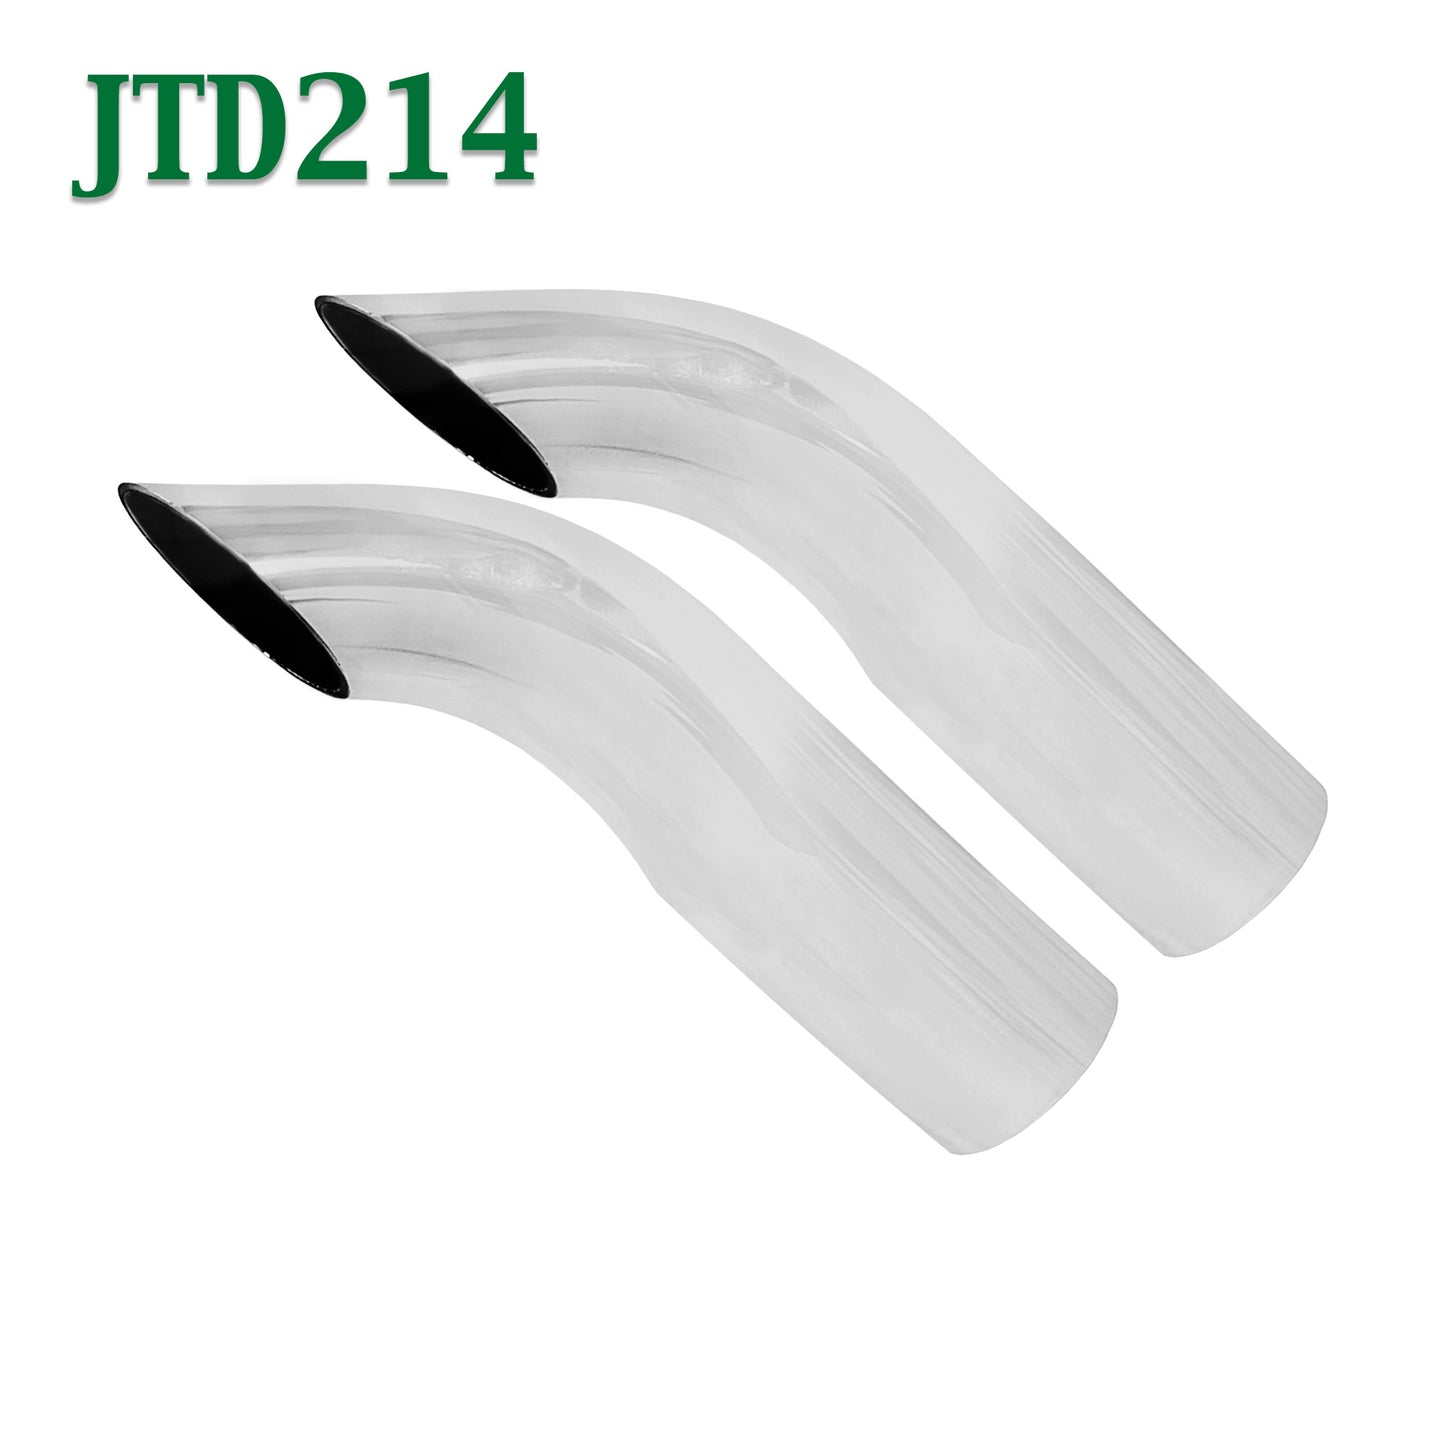 JTD214 2 1/4" Chrome Turn Down Exhaust Tip 2.25" Inlet 2 1/2" Outlet 11" Long